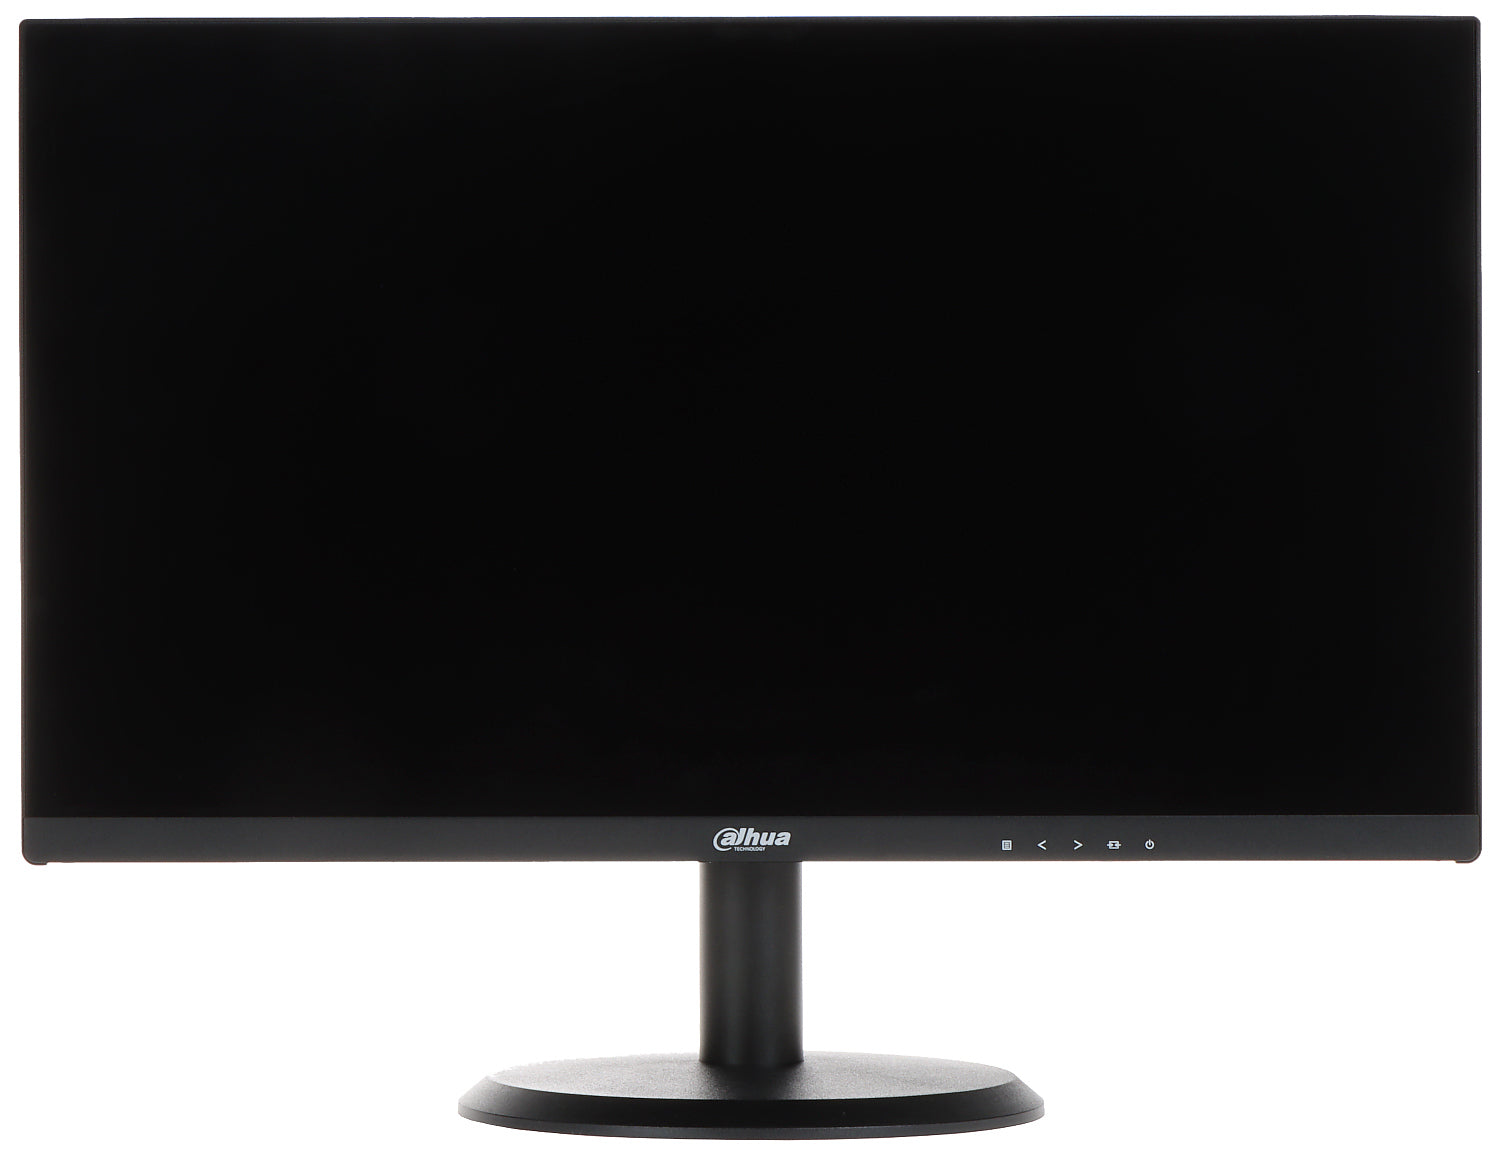 Dahua 21.45" LED Monitor Full HD With Speaker DHI-LM22-H200